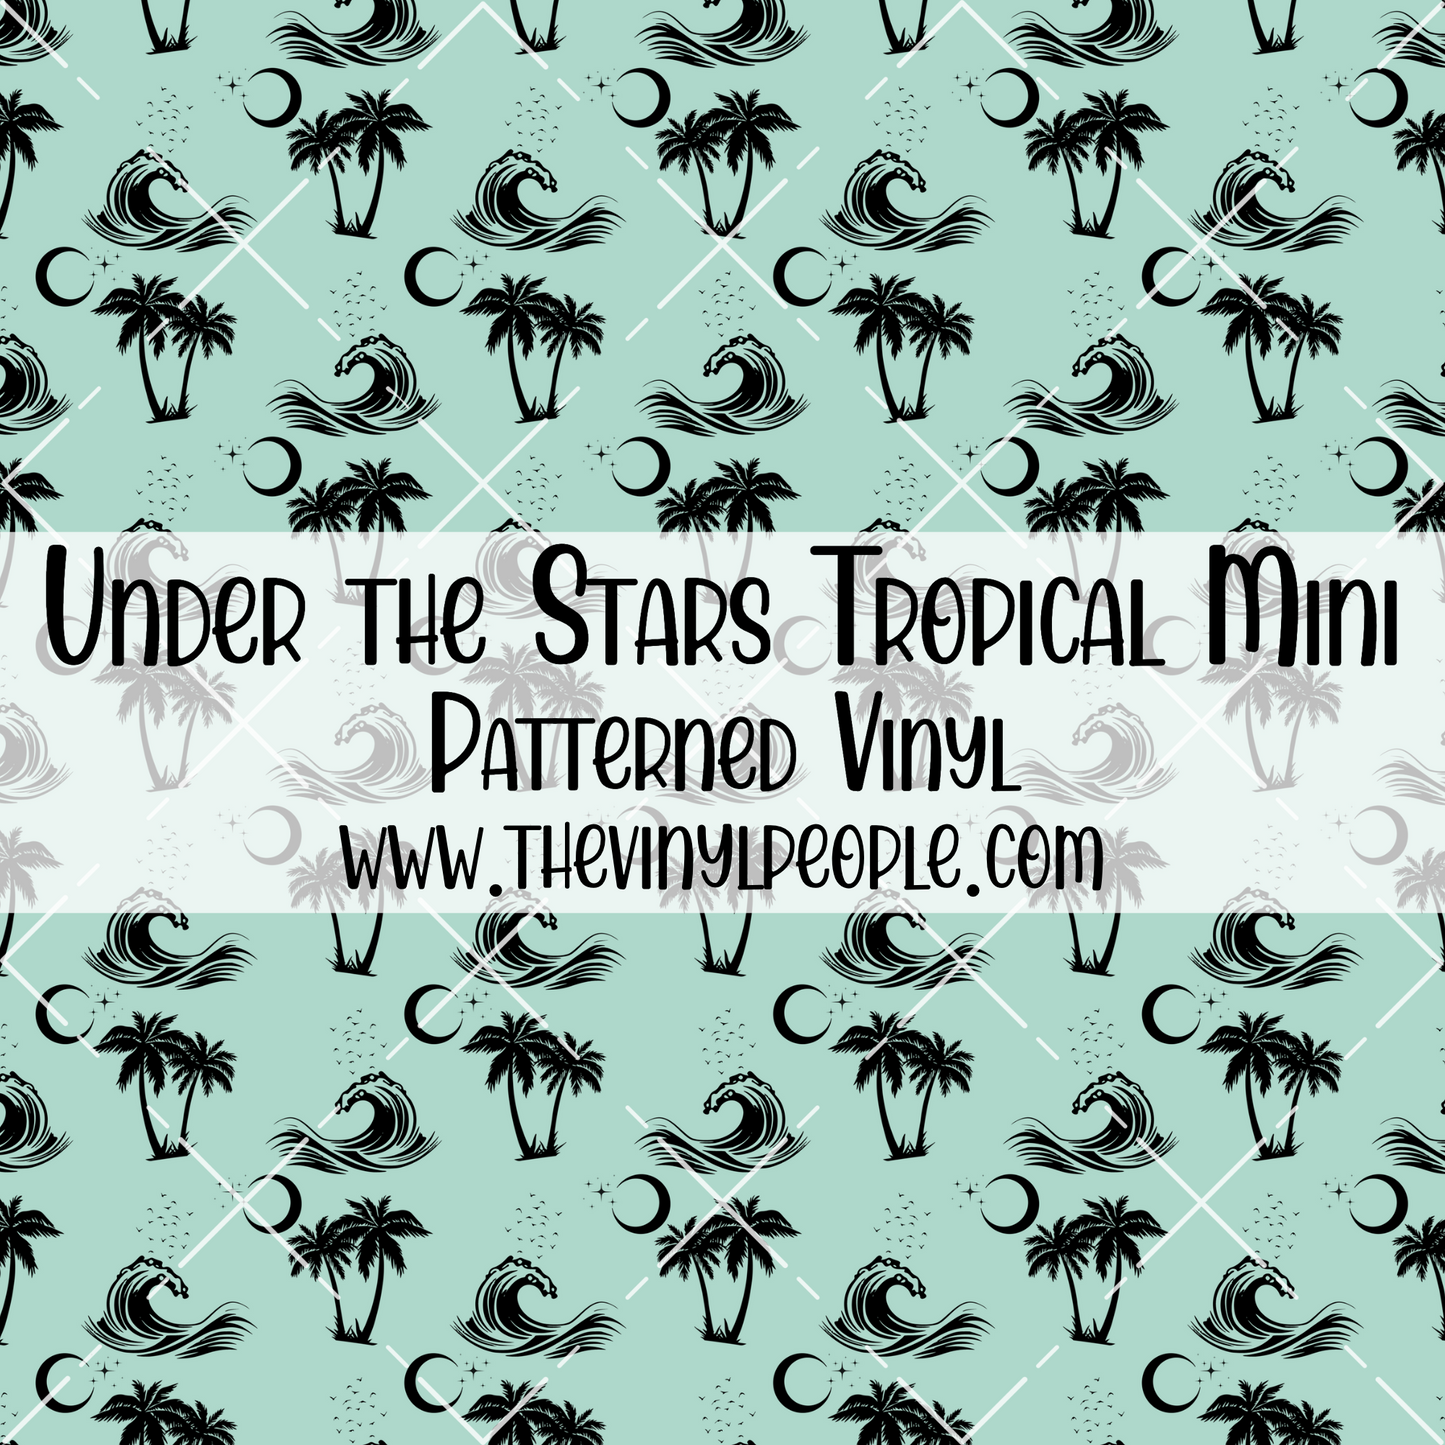 Under the Stars Tropical Patterned Vinyl